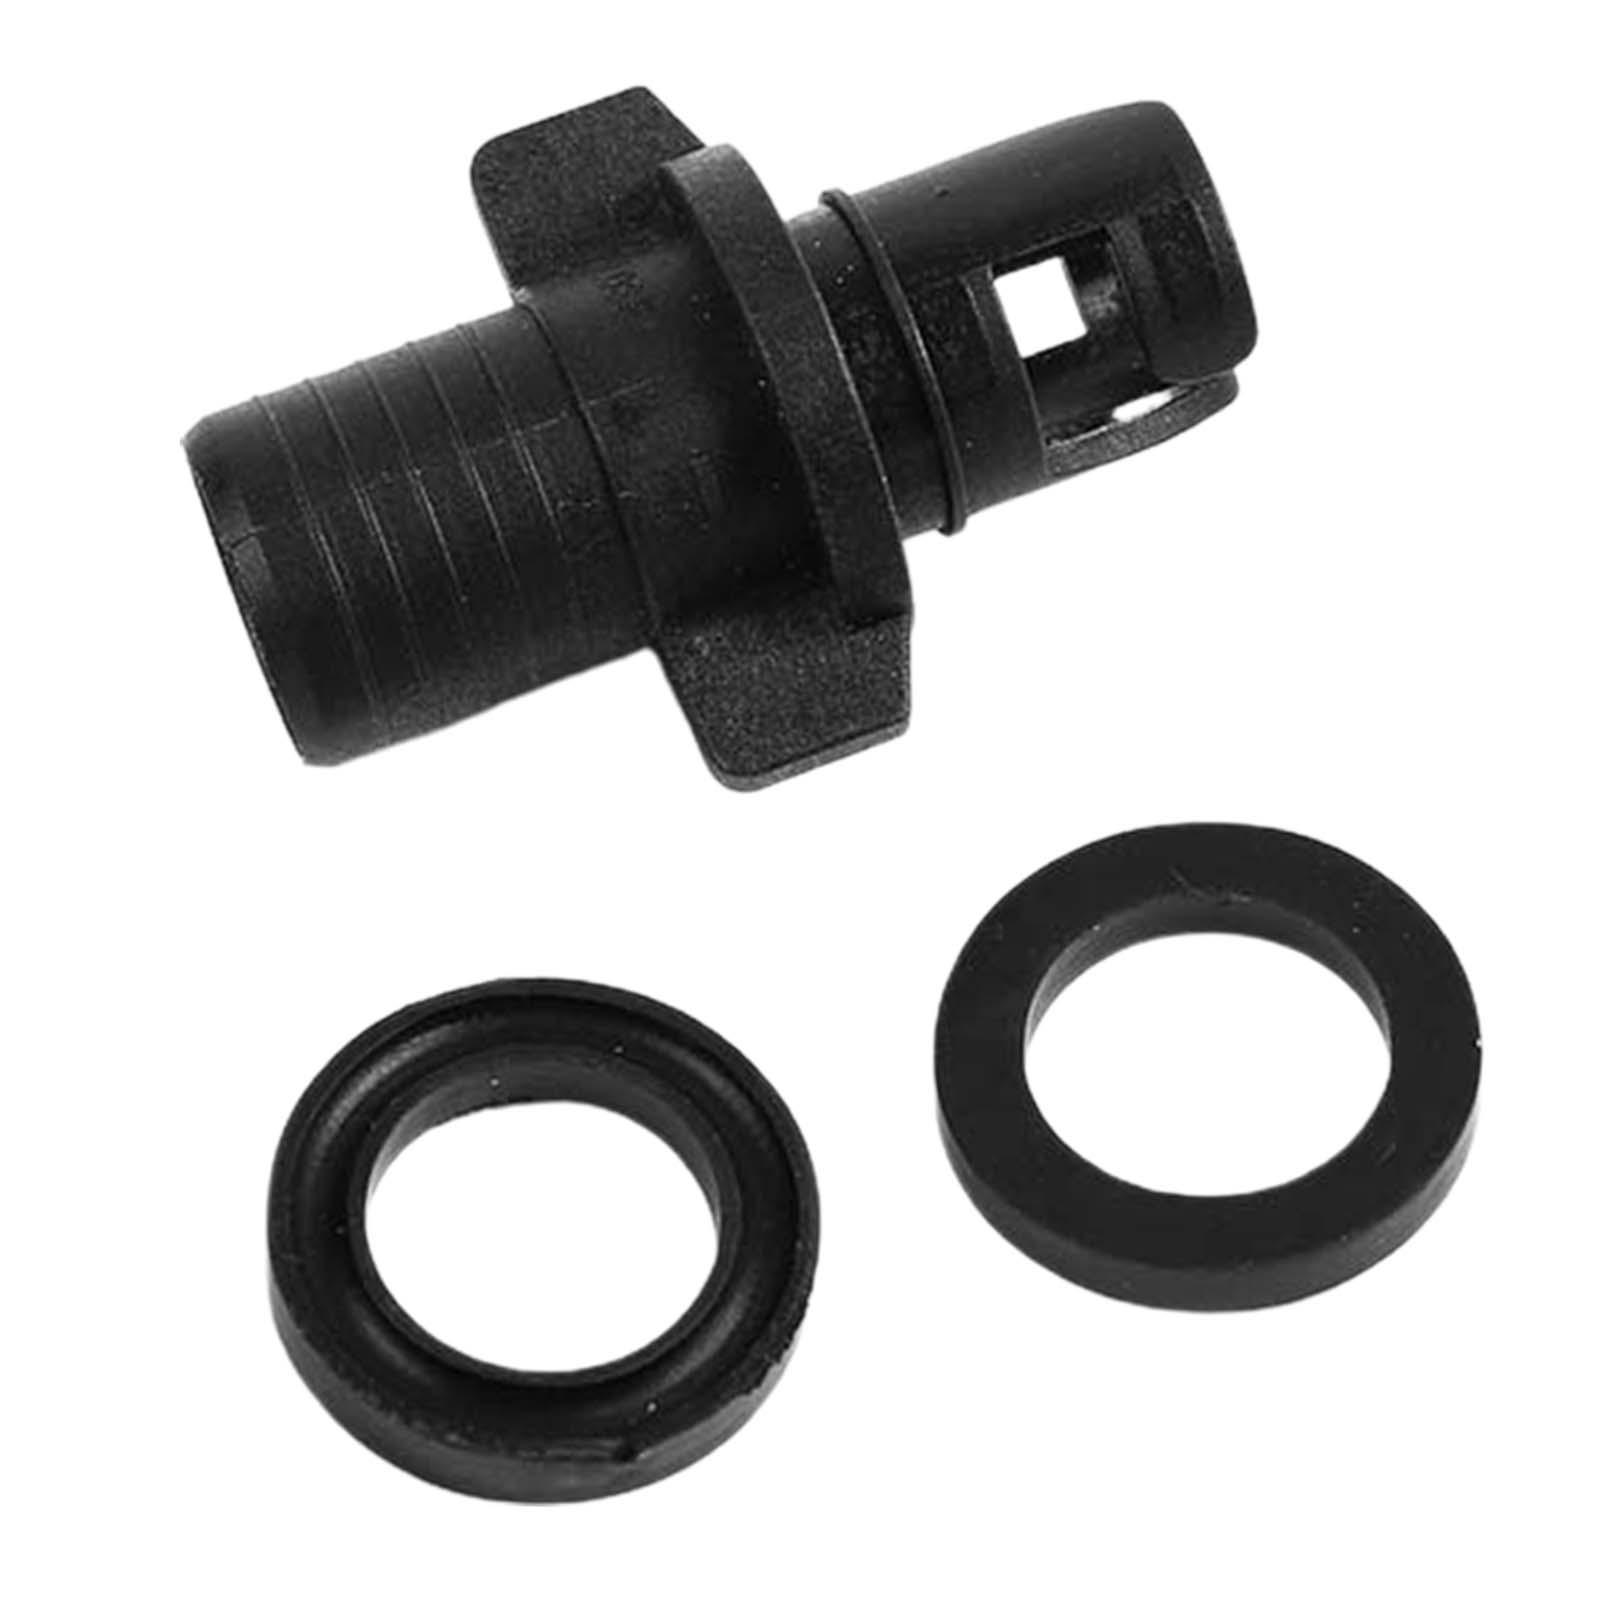 Air Valve Adapter Multifunction Connector Kayak Pump Hose Valve Adapter for Paddle Board Dinghy Rubber Boats Fishing Boats